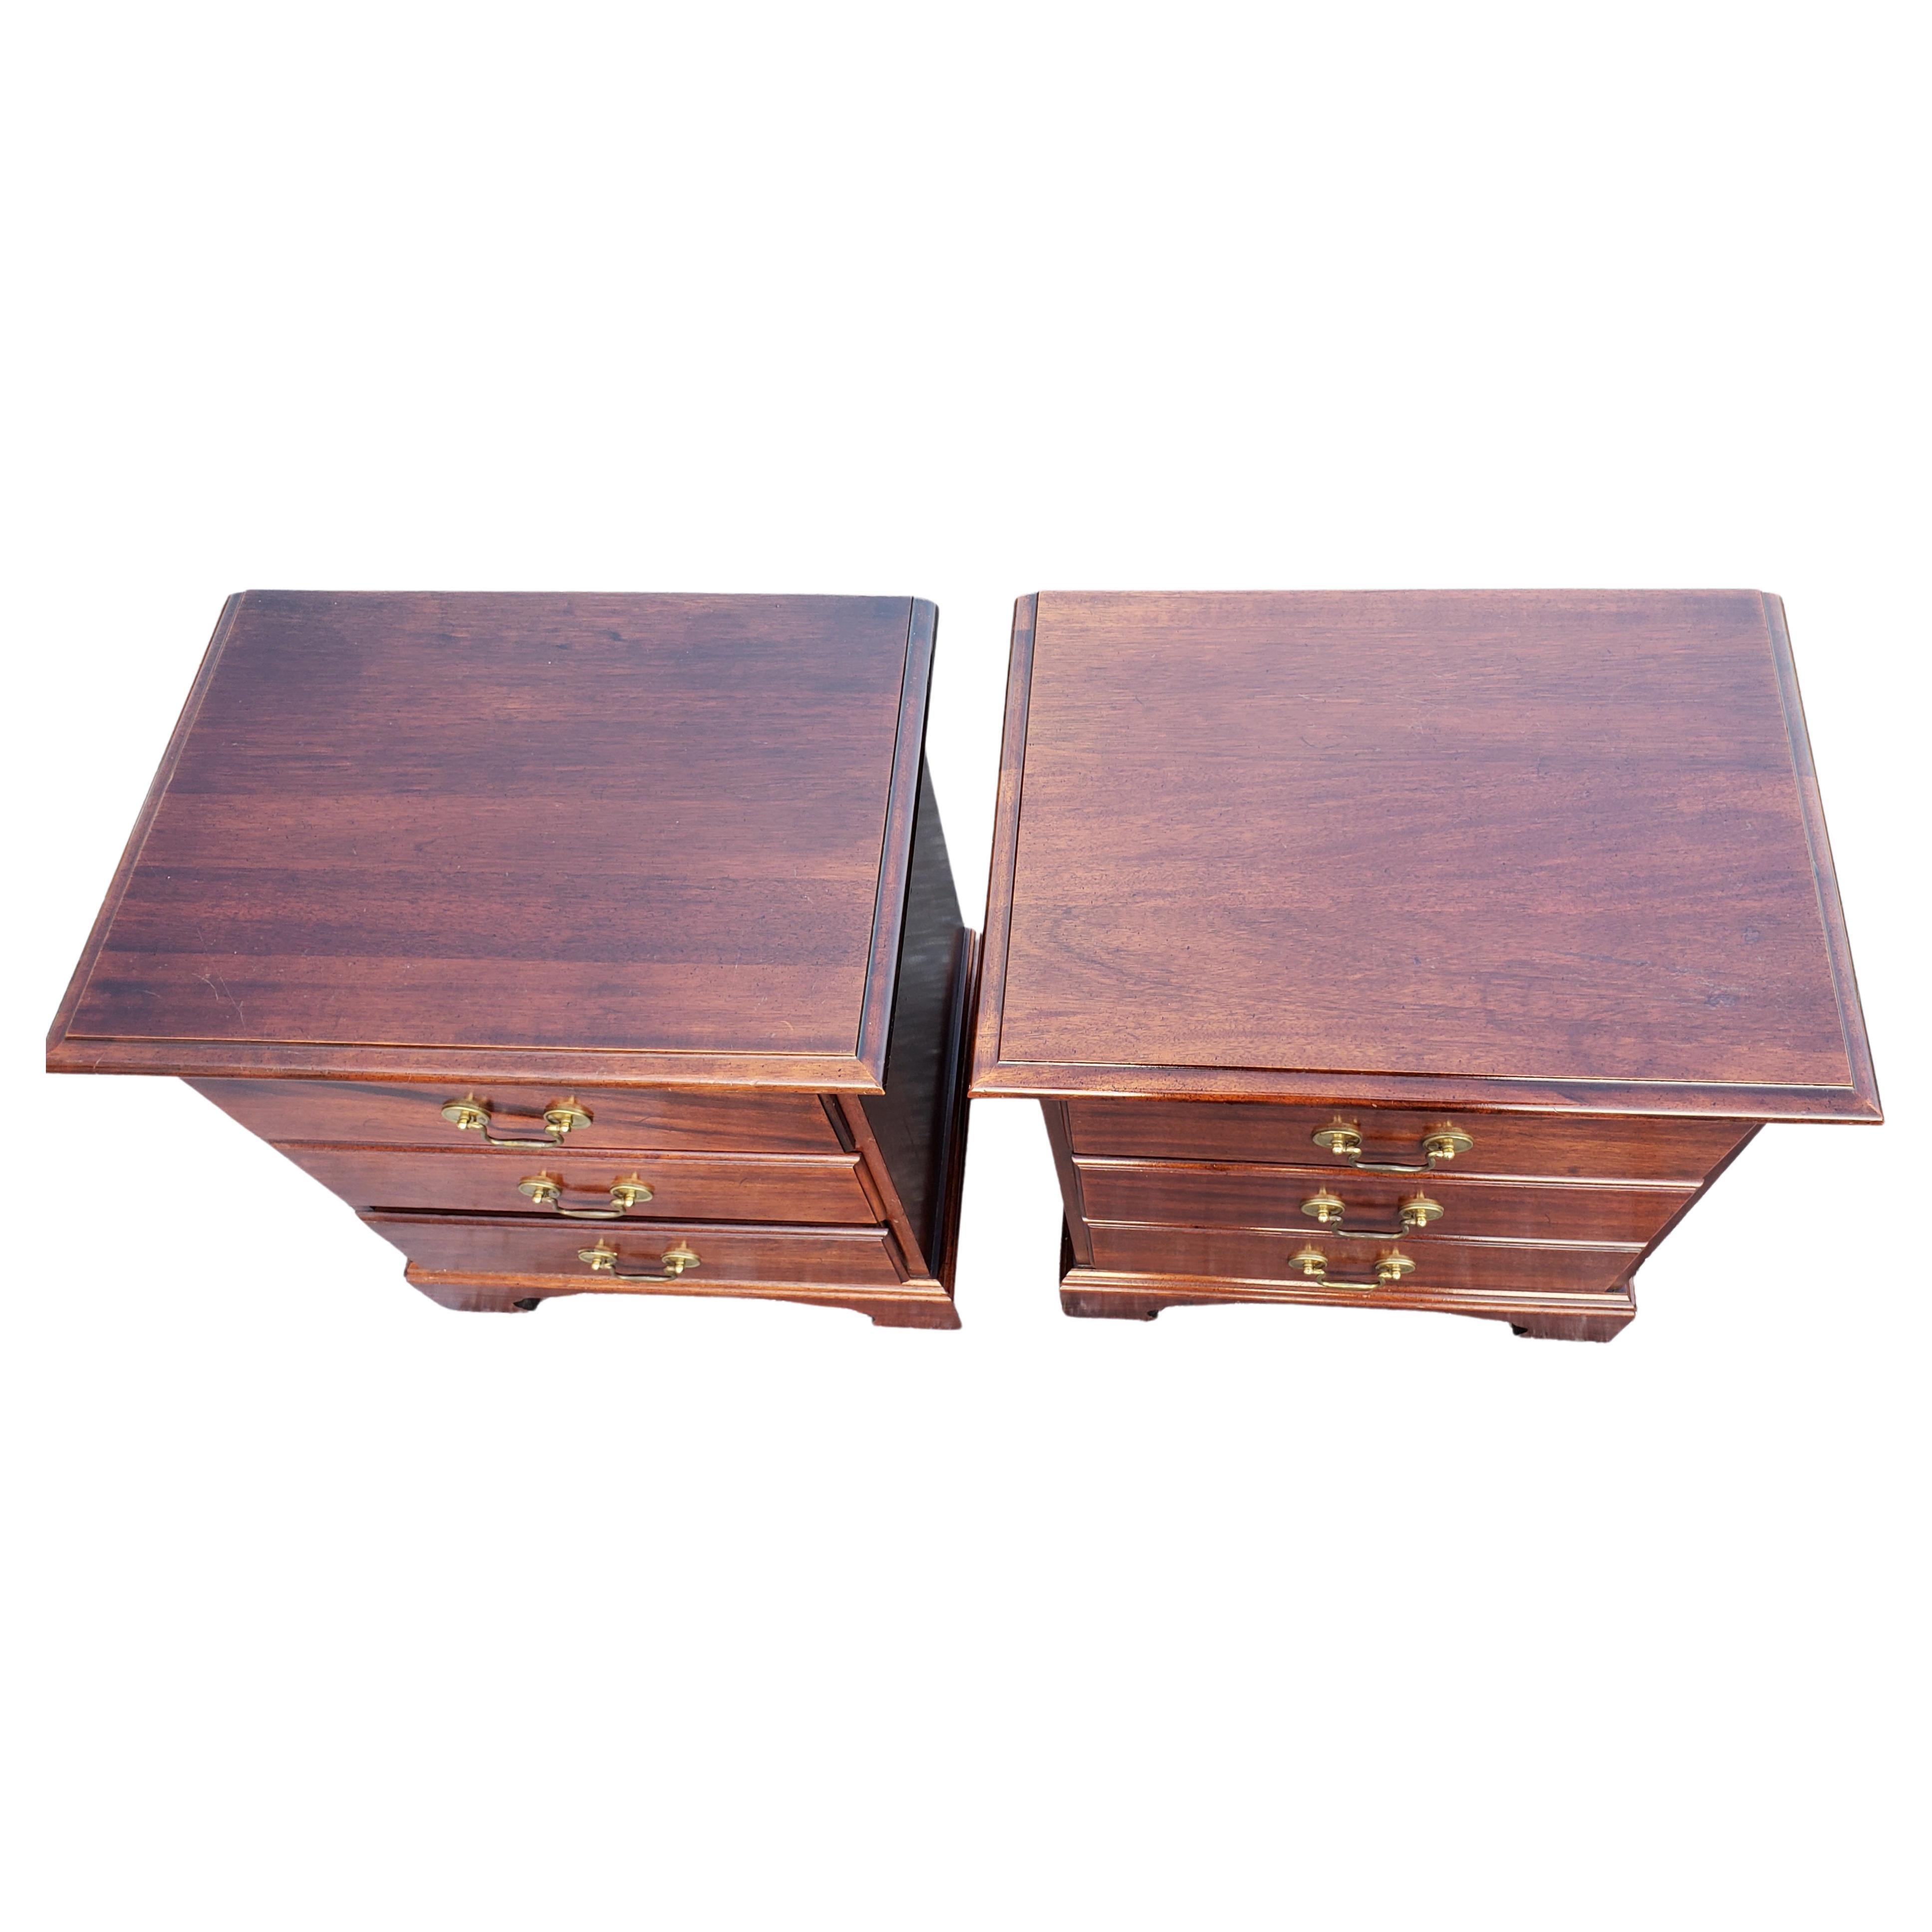 American Ethan Allen Chippendale 3-Drawer Side Tables Nightstands, a Pair